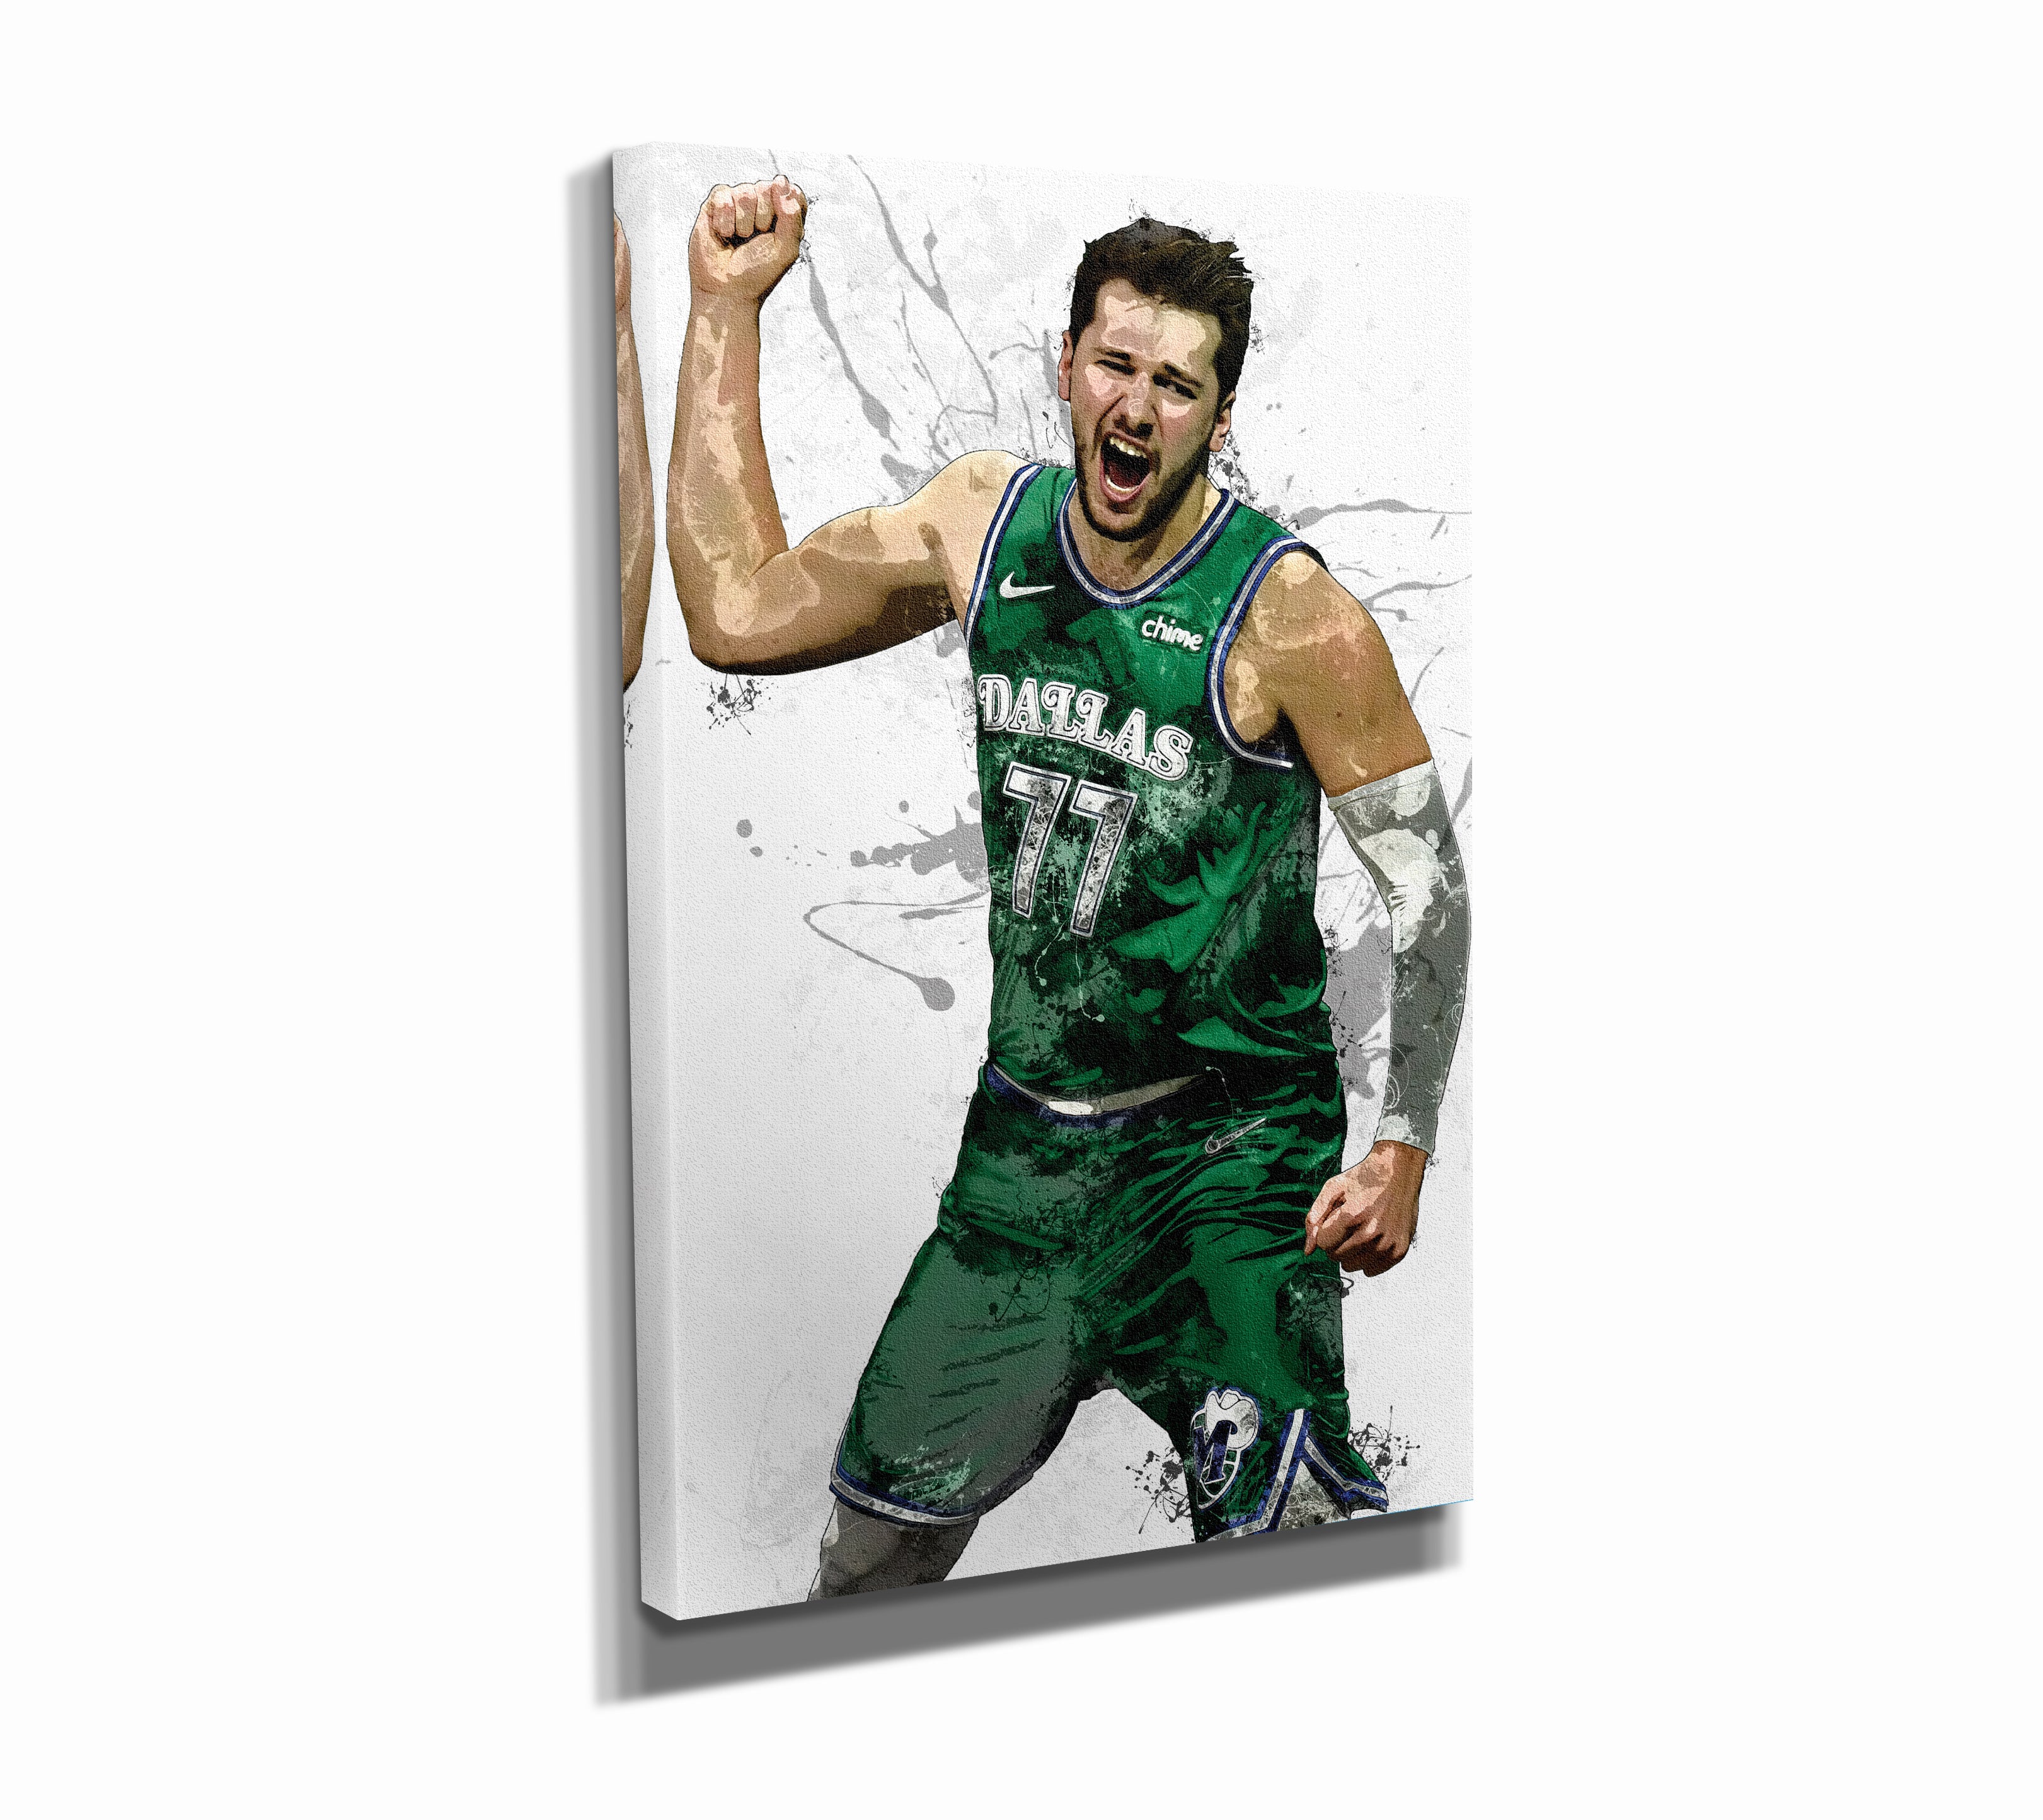 FANCHUANG Luka Doncic Basketball Posters Motivational Poster for Boys  Bedroom Wall Canvas Inspirational Wall Art Unframe-style 12x18inch(30x45cm)  : : Home & Kitchen